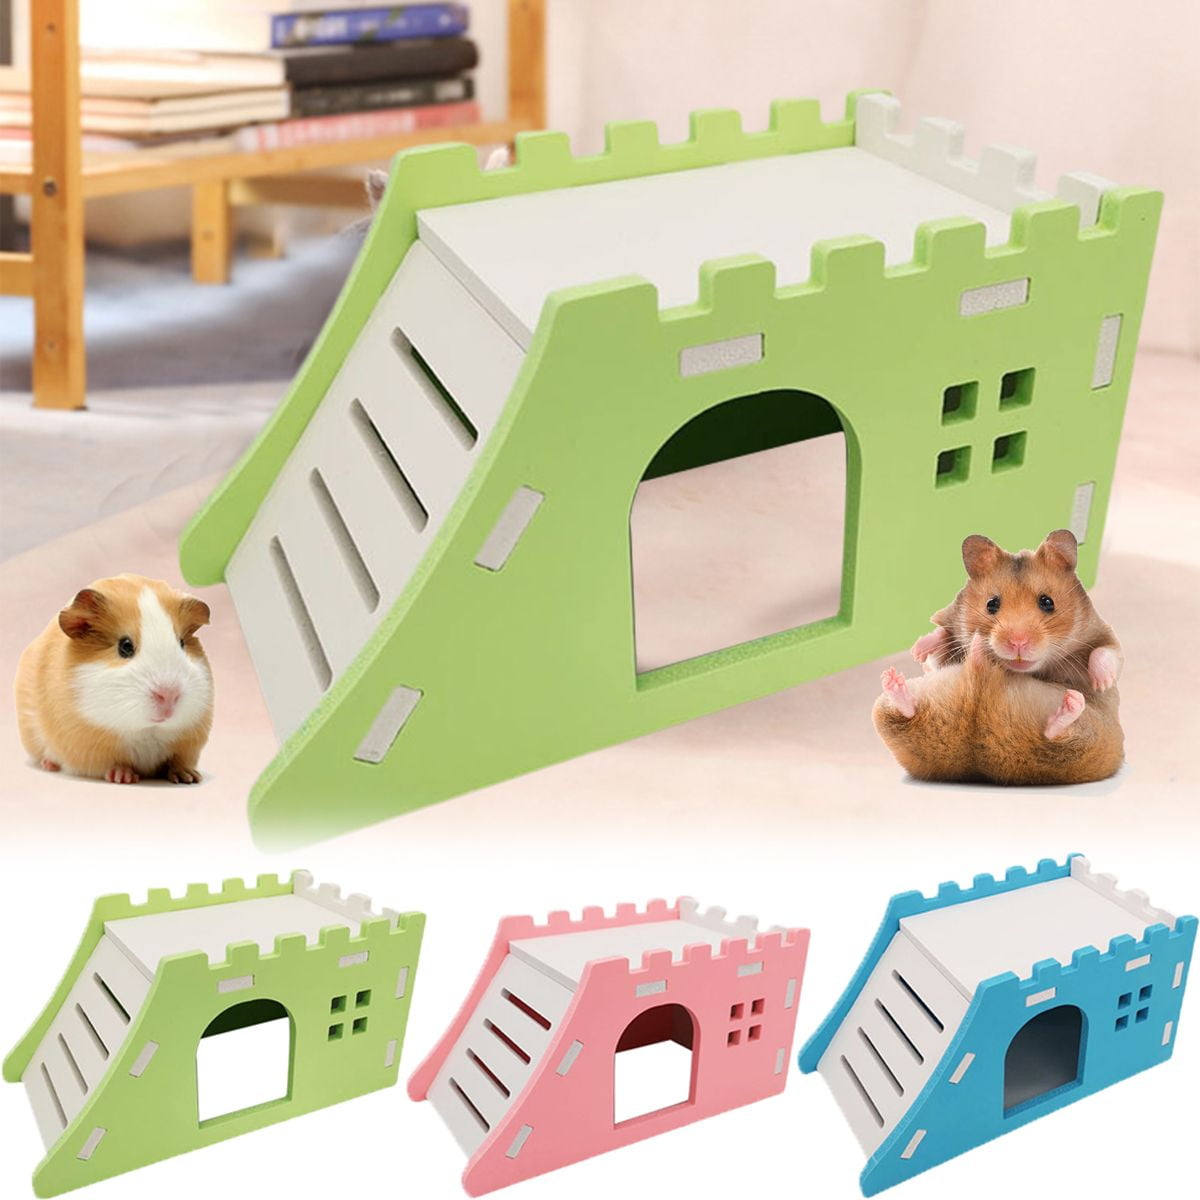 6. Trixie hamster ladder and climbing wall toy